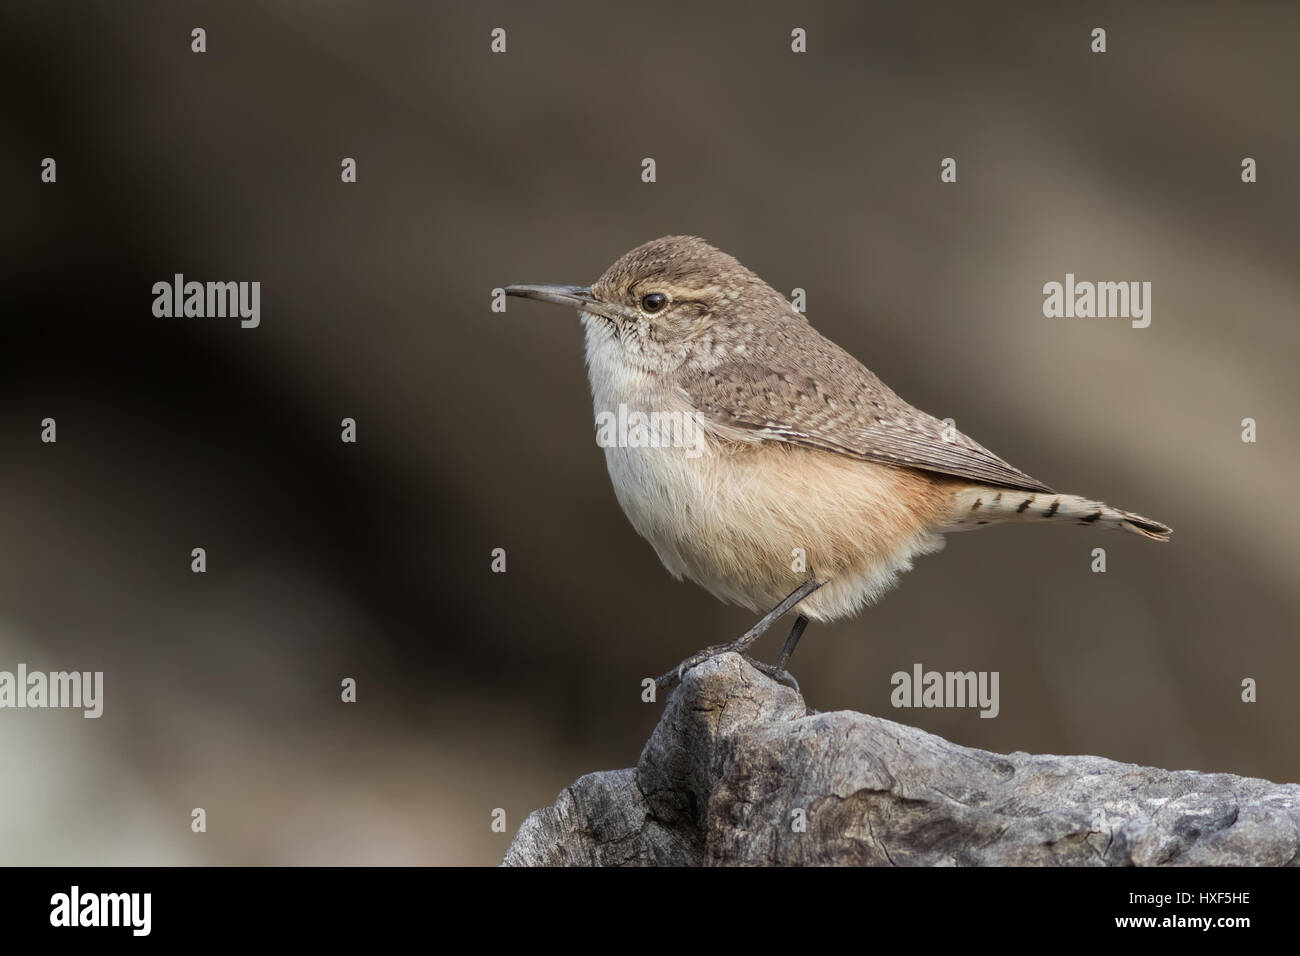 A friendly Rock Wren sits on a dead log while looking for insect prey. These bold birds are fun subjects and have energetic personalities. Stock Photo